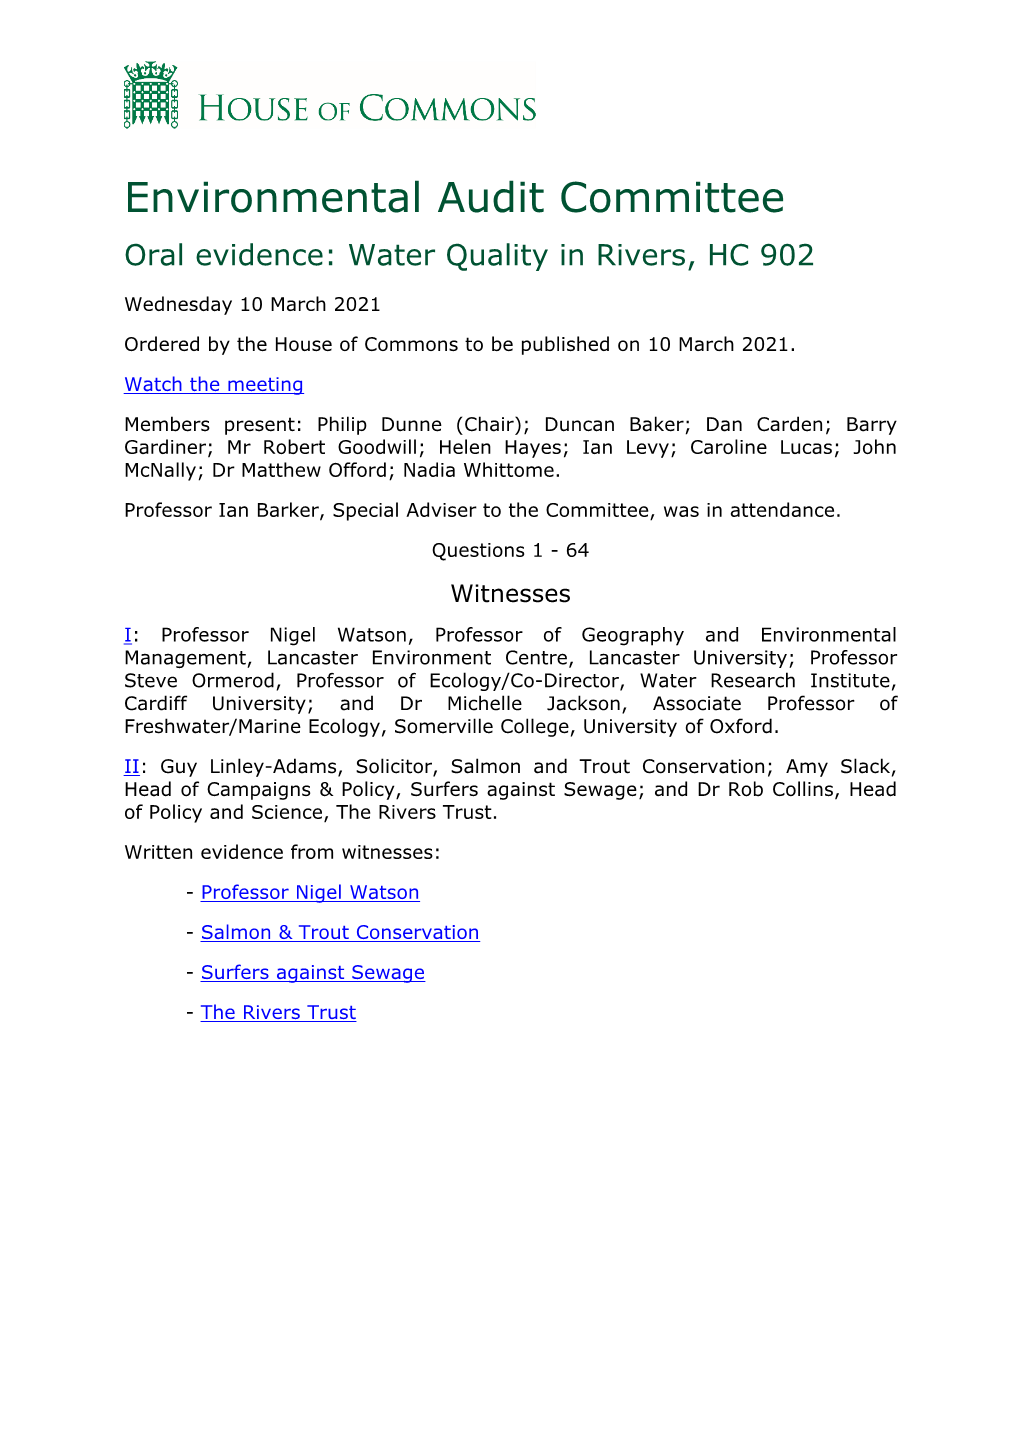 Environmental Audit Committee Oral Evidence: Water Quality in Rivers, HC 902